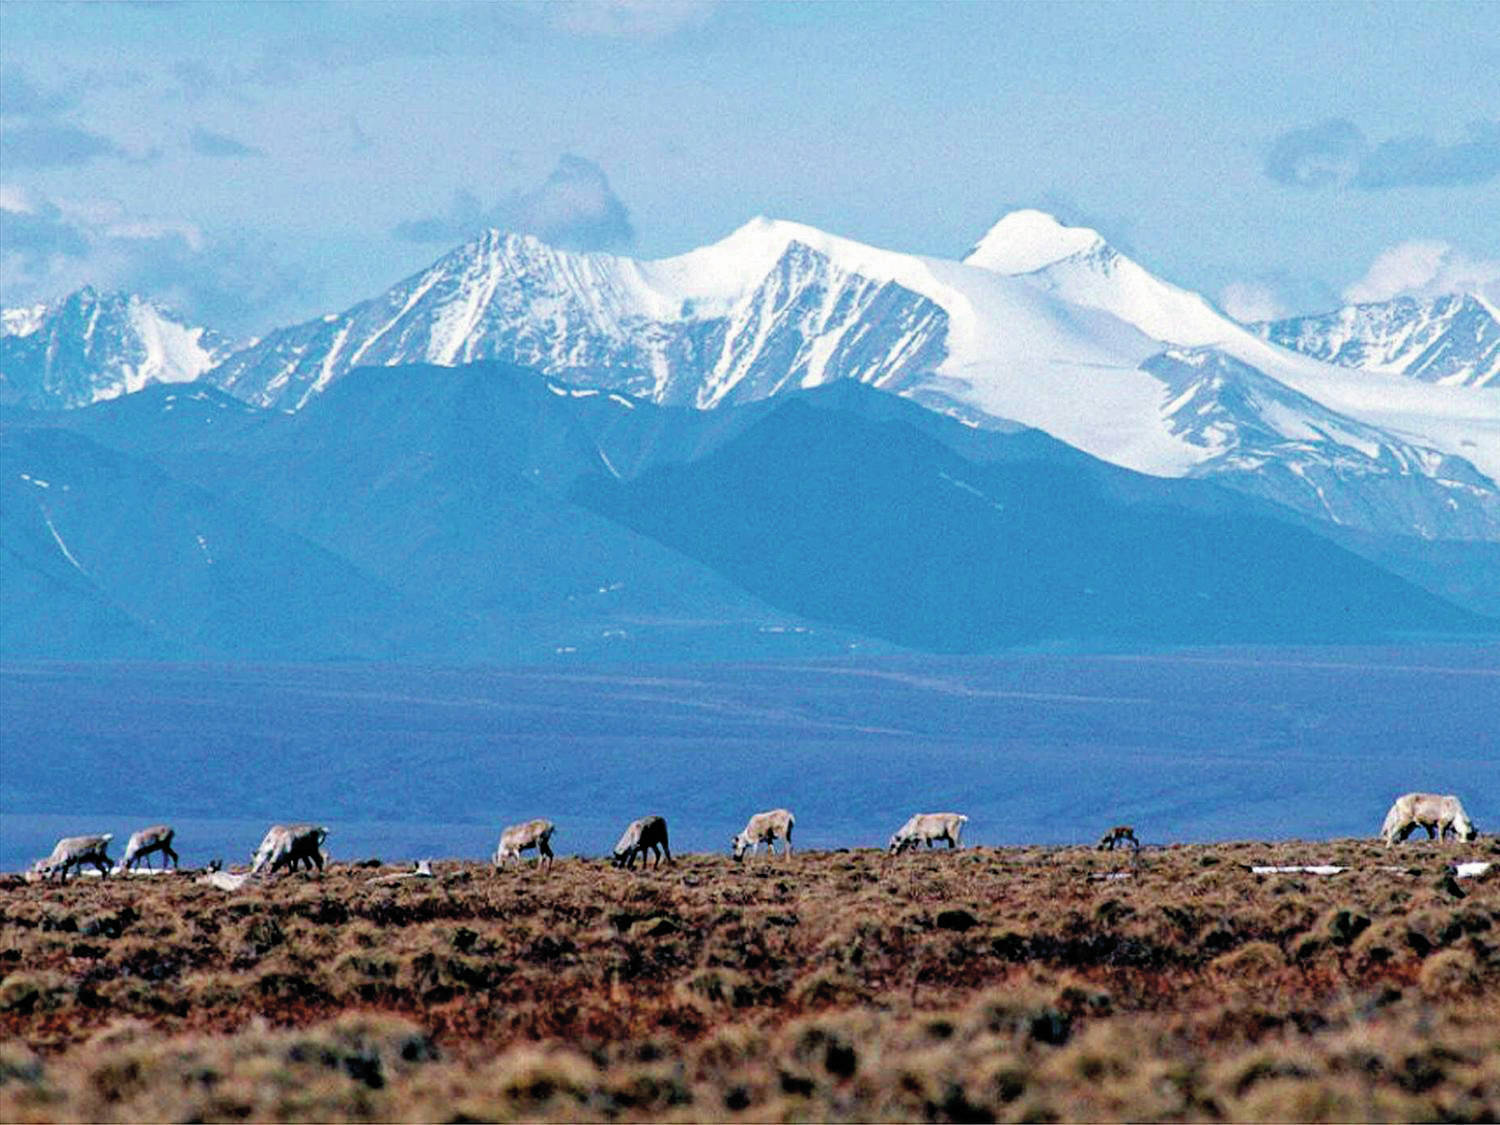 AP Photo/File
In this June 1, 2001 file photo, caribou graze in the Arctic National Wildlife Refuge in Alaska. U.S. District Judge Sharon Gleason, on Wednesday, Aug. 18, has thrown out the Trump administration’s approval for a massive oil project on Alaska’s North Slope, saying the federal review was flawed and didn’t include mitigation measures for polar bears.